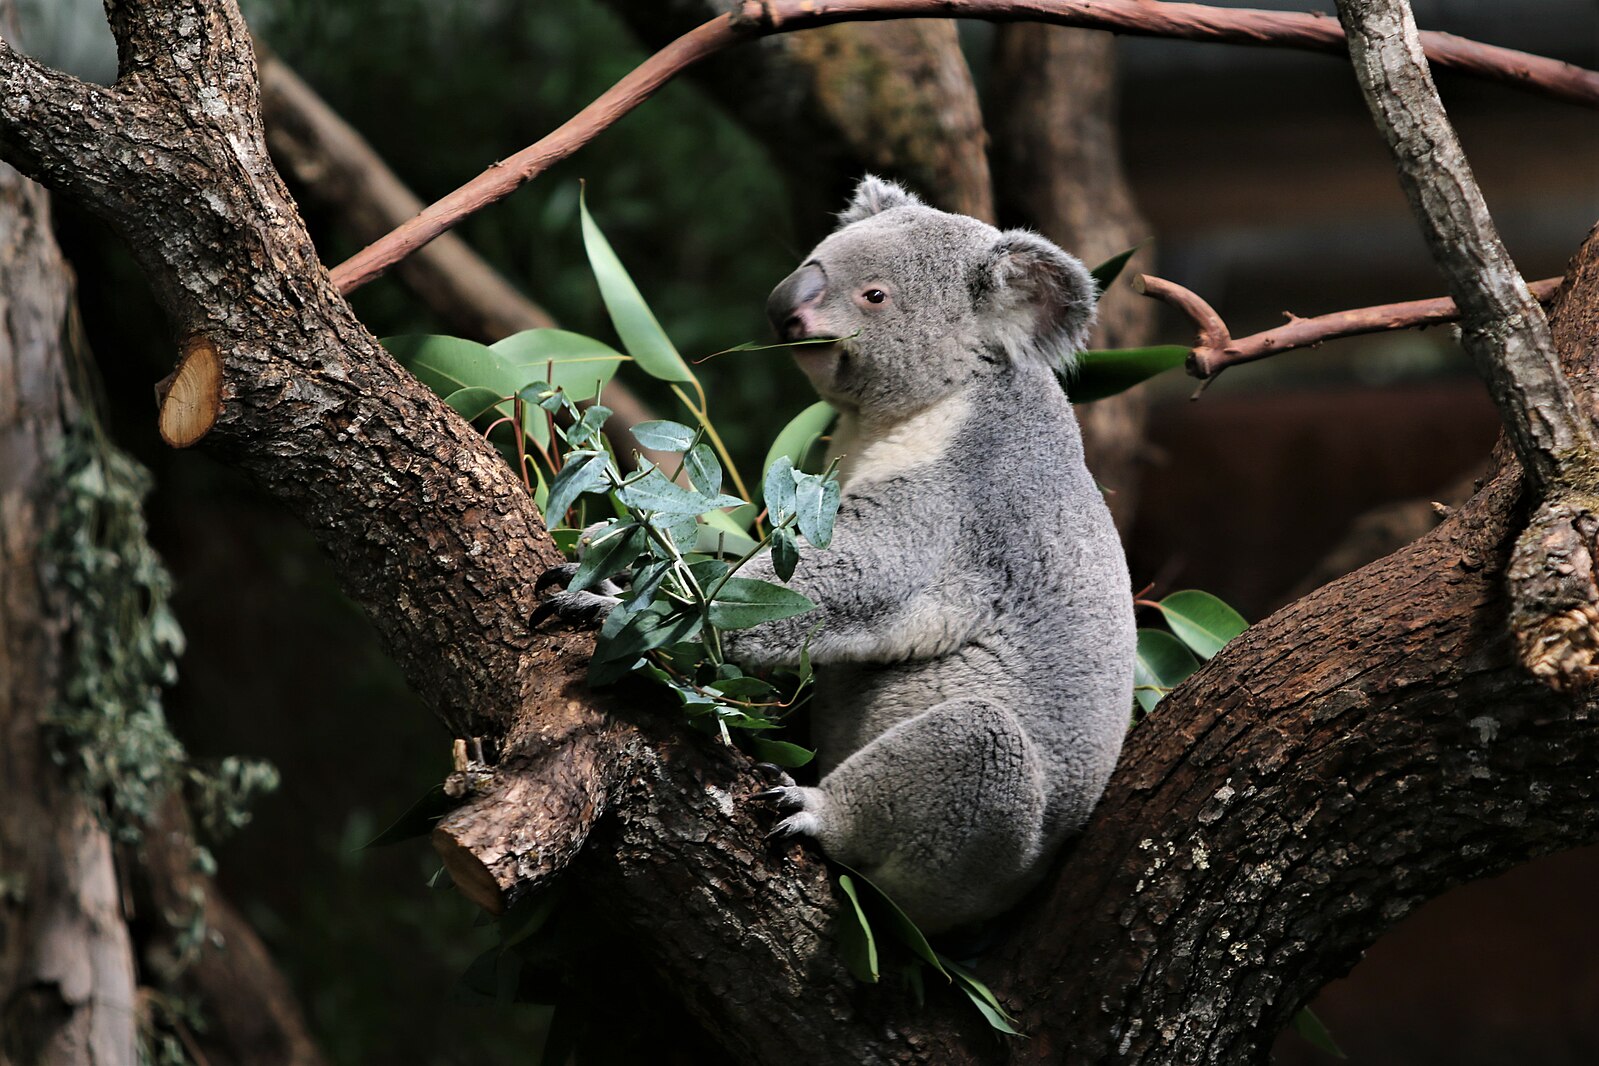 Up to 19,000 hectares of forest in koala park set to be destroyed